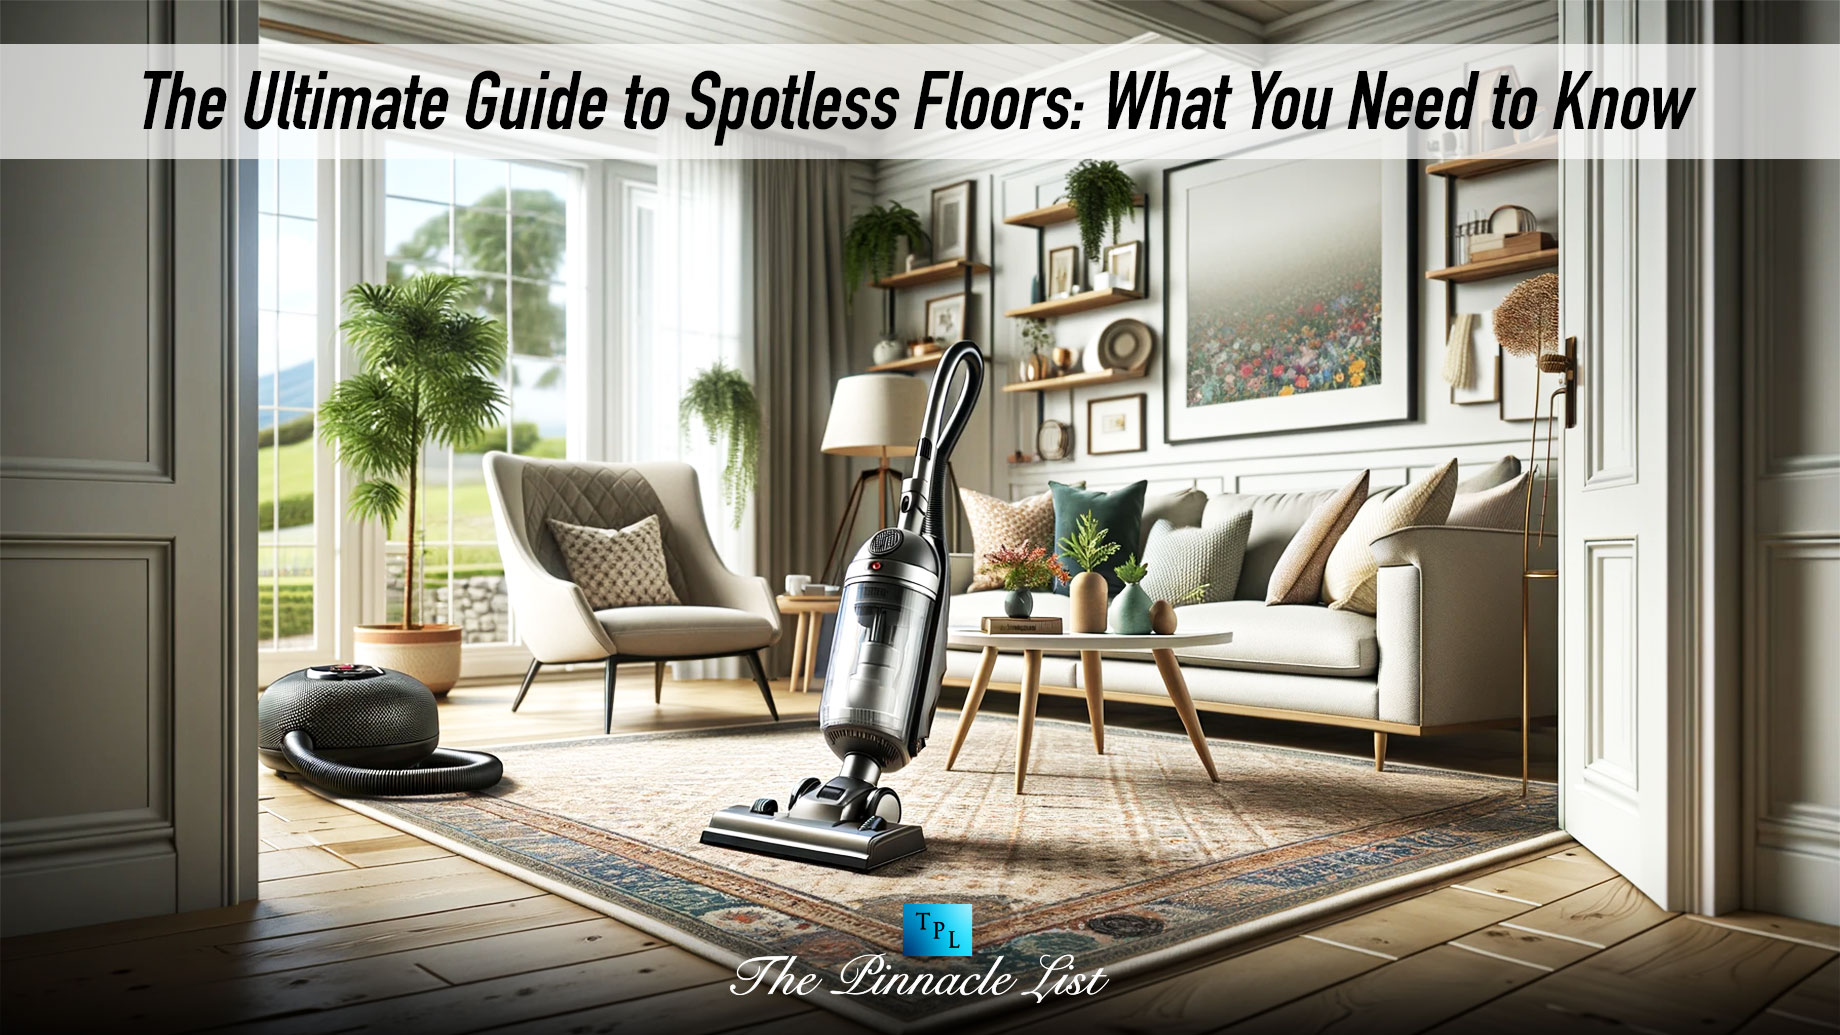 The Ultimate Guide to Spotless Floors: What You Need to Know